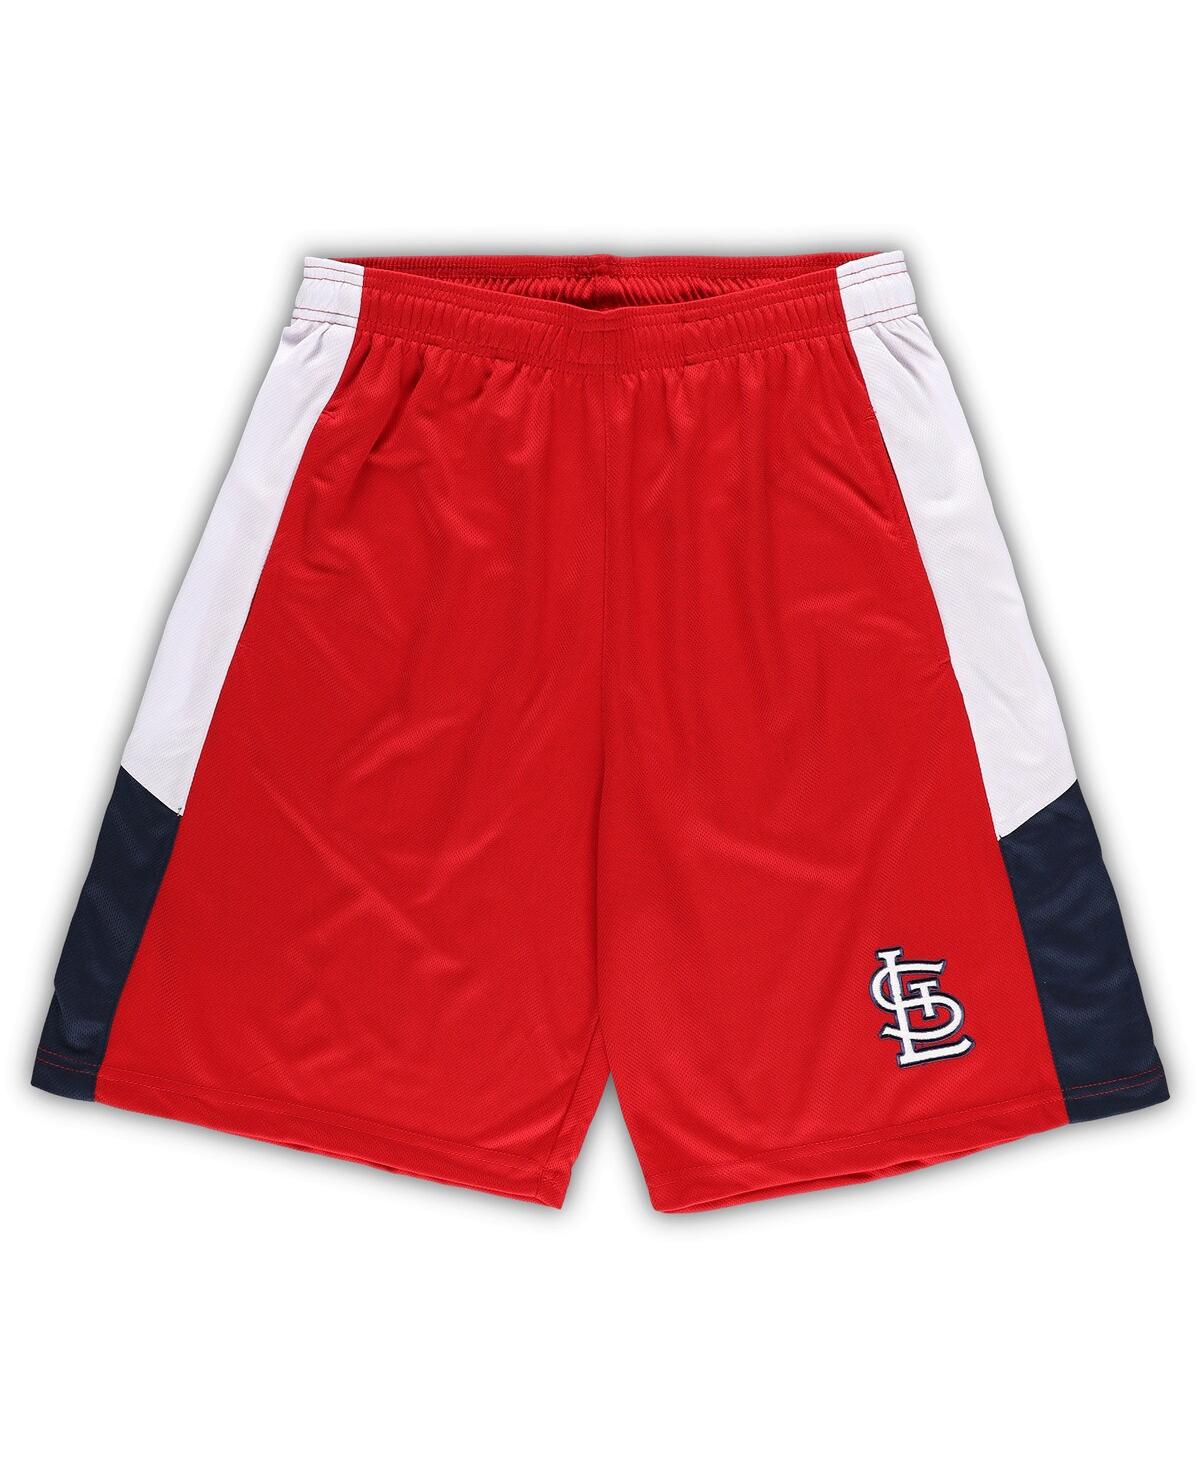 PROFILE MEN'S RED ST. LOUIS CARDINALS BIG AND TALL TEAM SHORTS